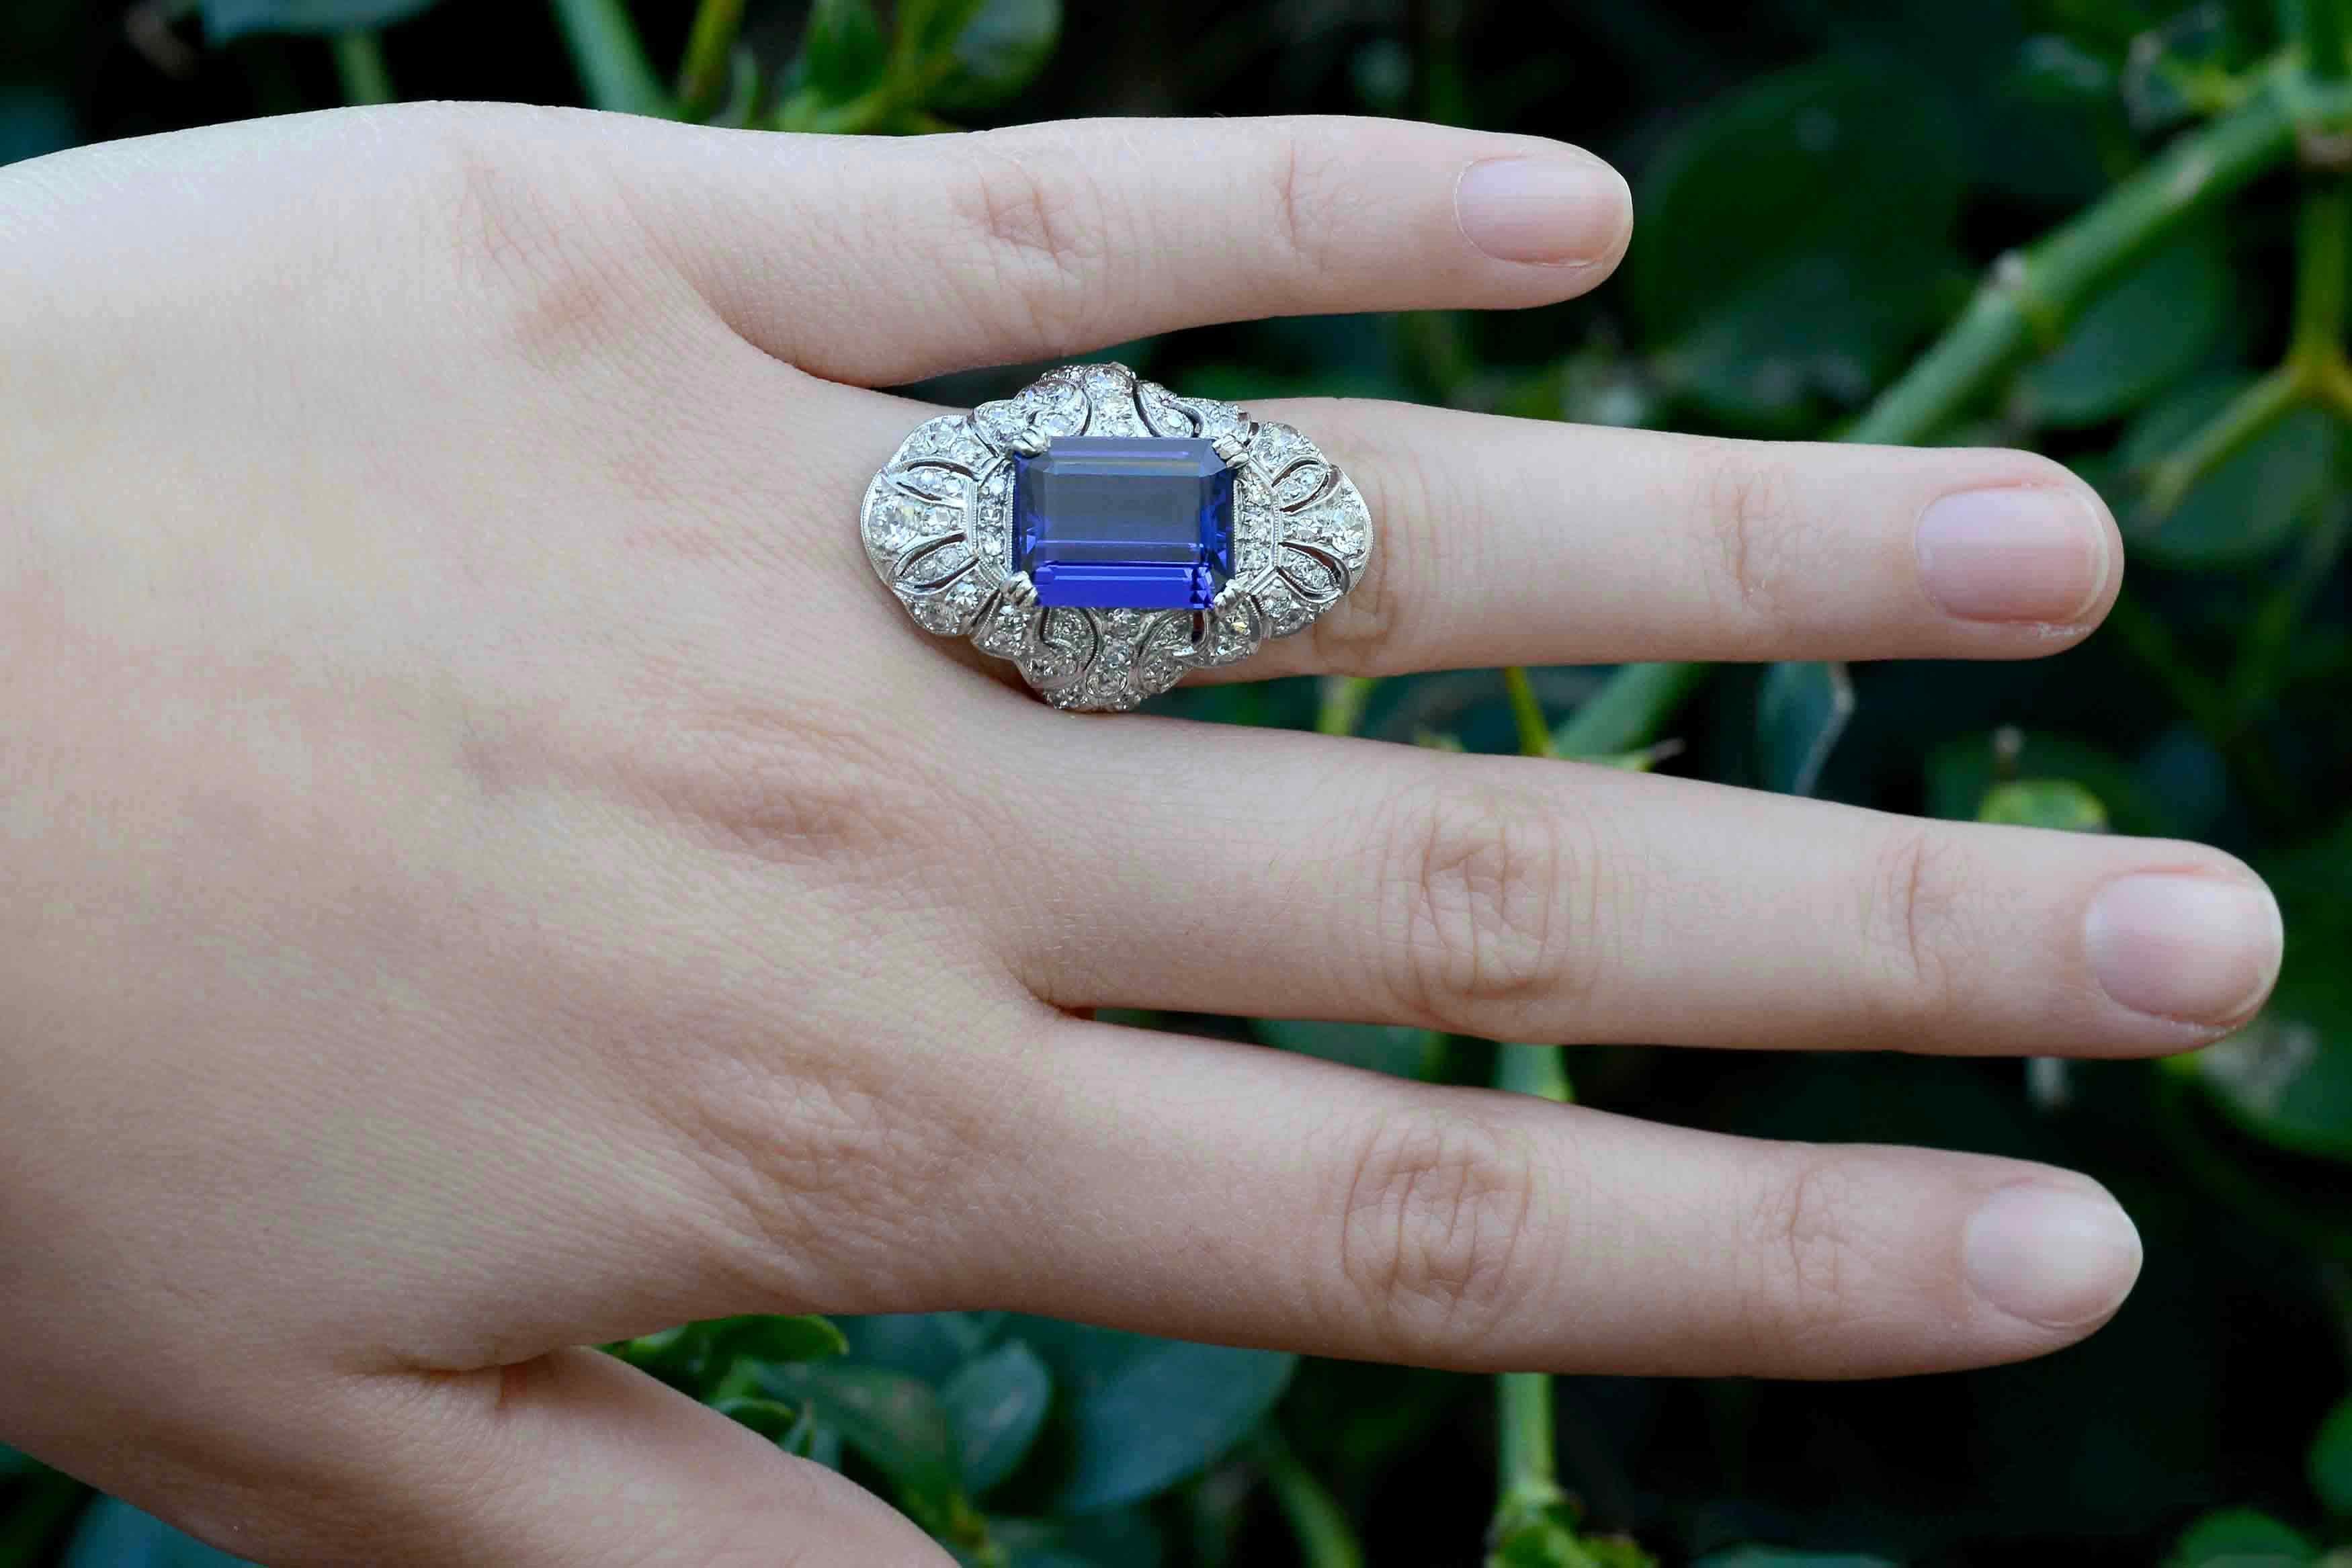 The Aptos Cocktail Ring. When I found this glorious antique platinum setting, I knew I had the perfect gemstone waiting for it. Imagine my surprise when the huge (7.36 Ct) Emerald Cut Tanzanite I'd been hoarding for 5 years fit right into the long